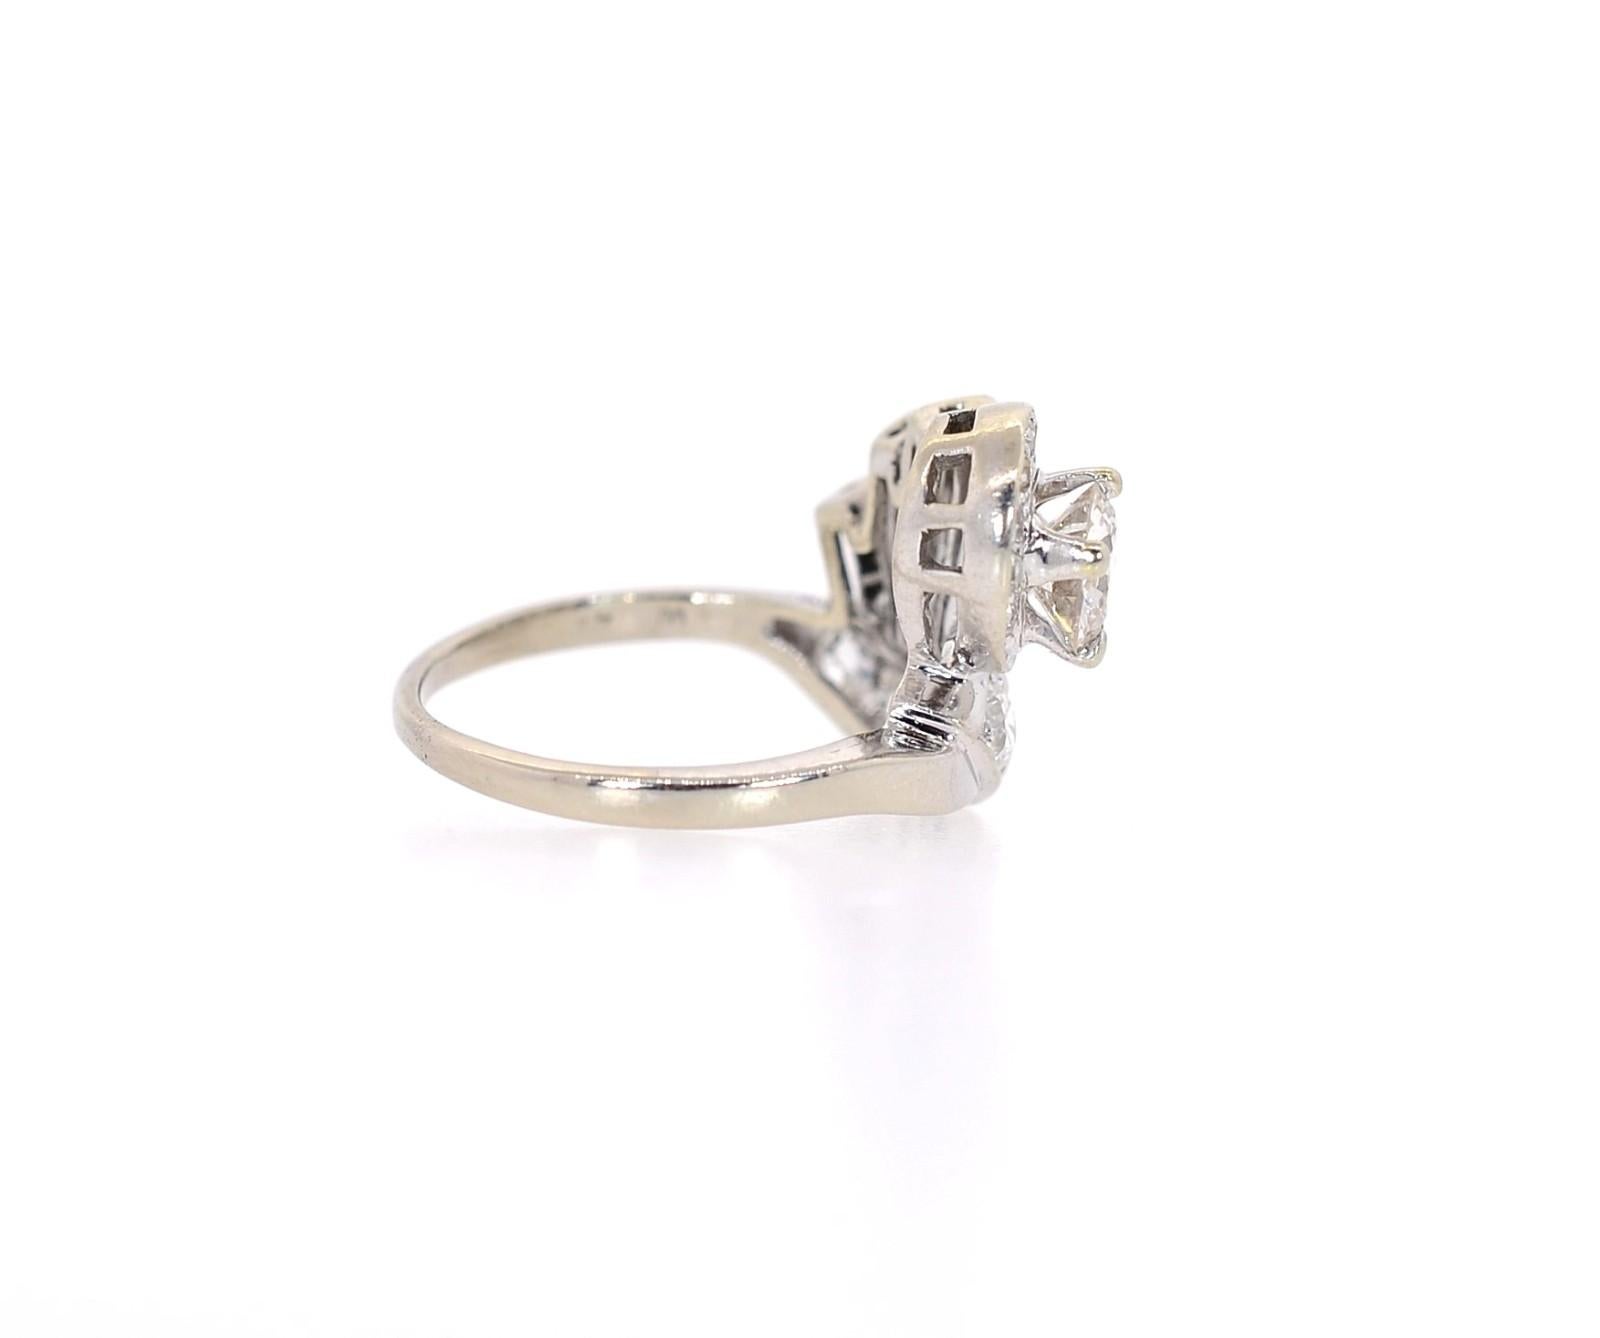 Vintage 1.78 Carat Old Cut Diamonds Cocktail Ring In Good Condition For Sale In Beverly Hills, CA